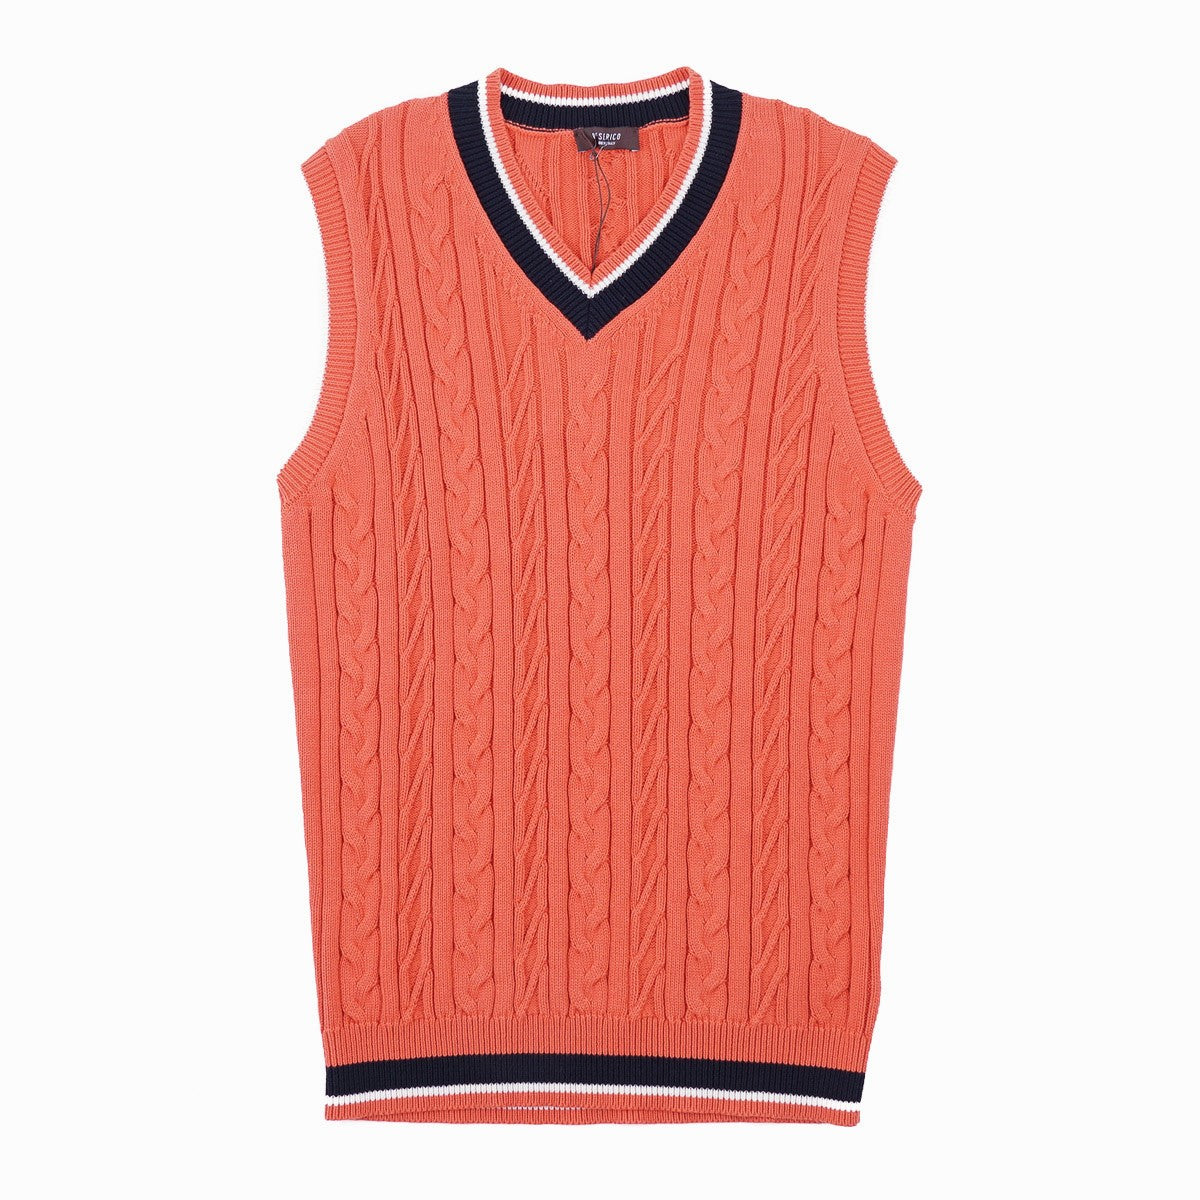 Peserico Cable Knit Cotton Sweater Vest - Top Shelf Apparel